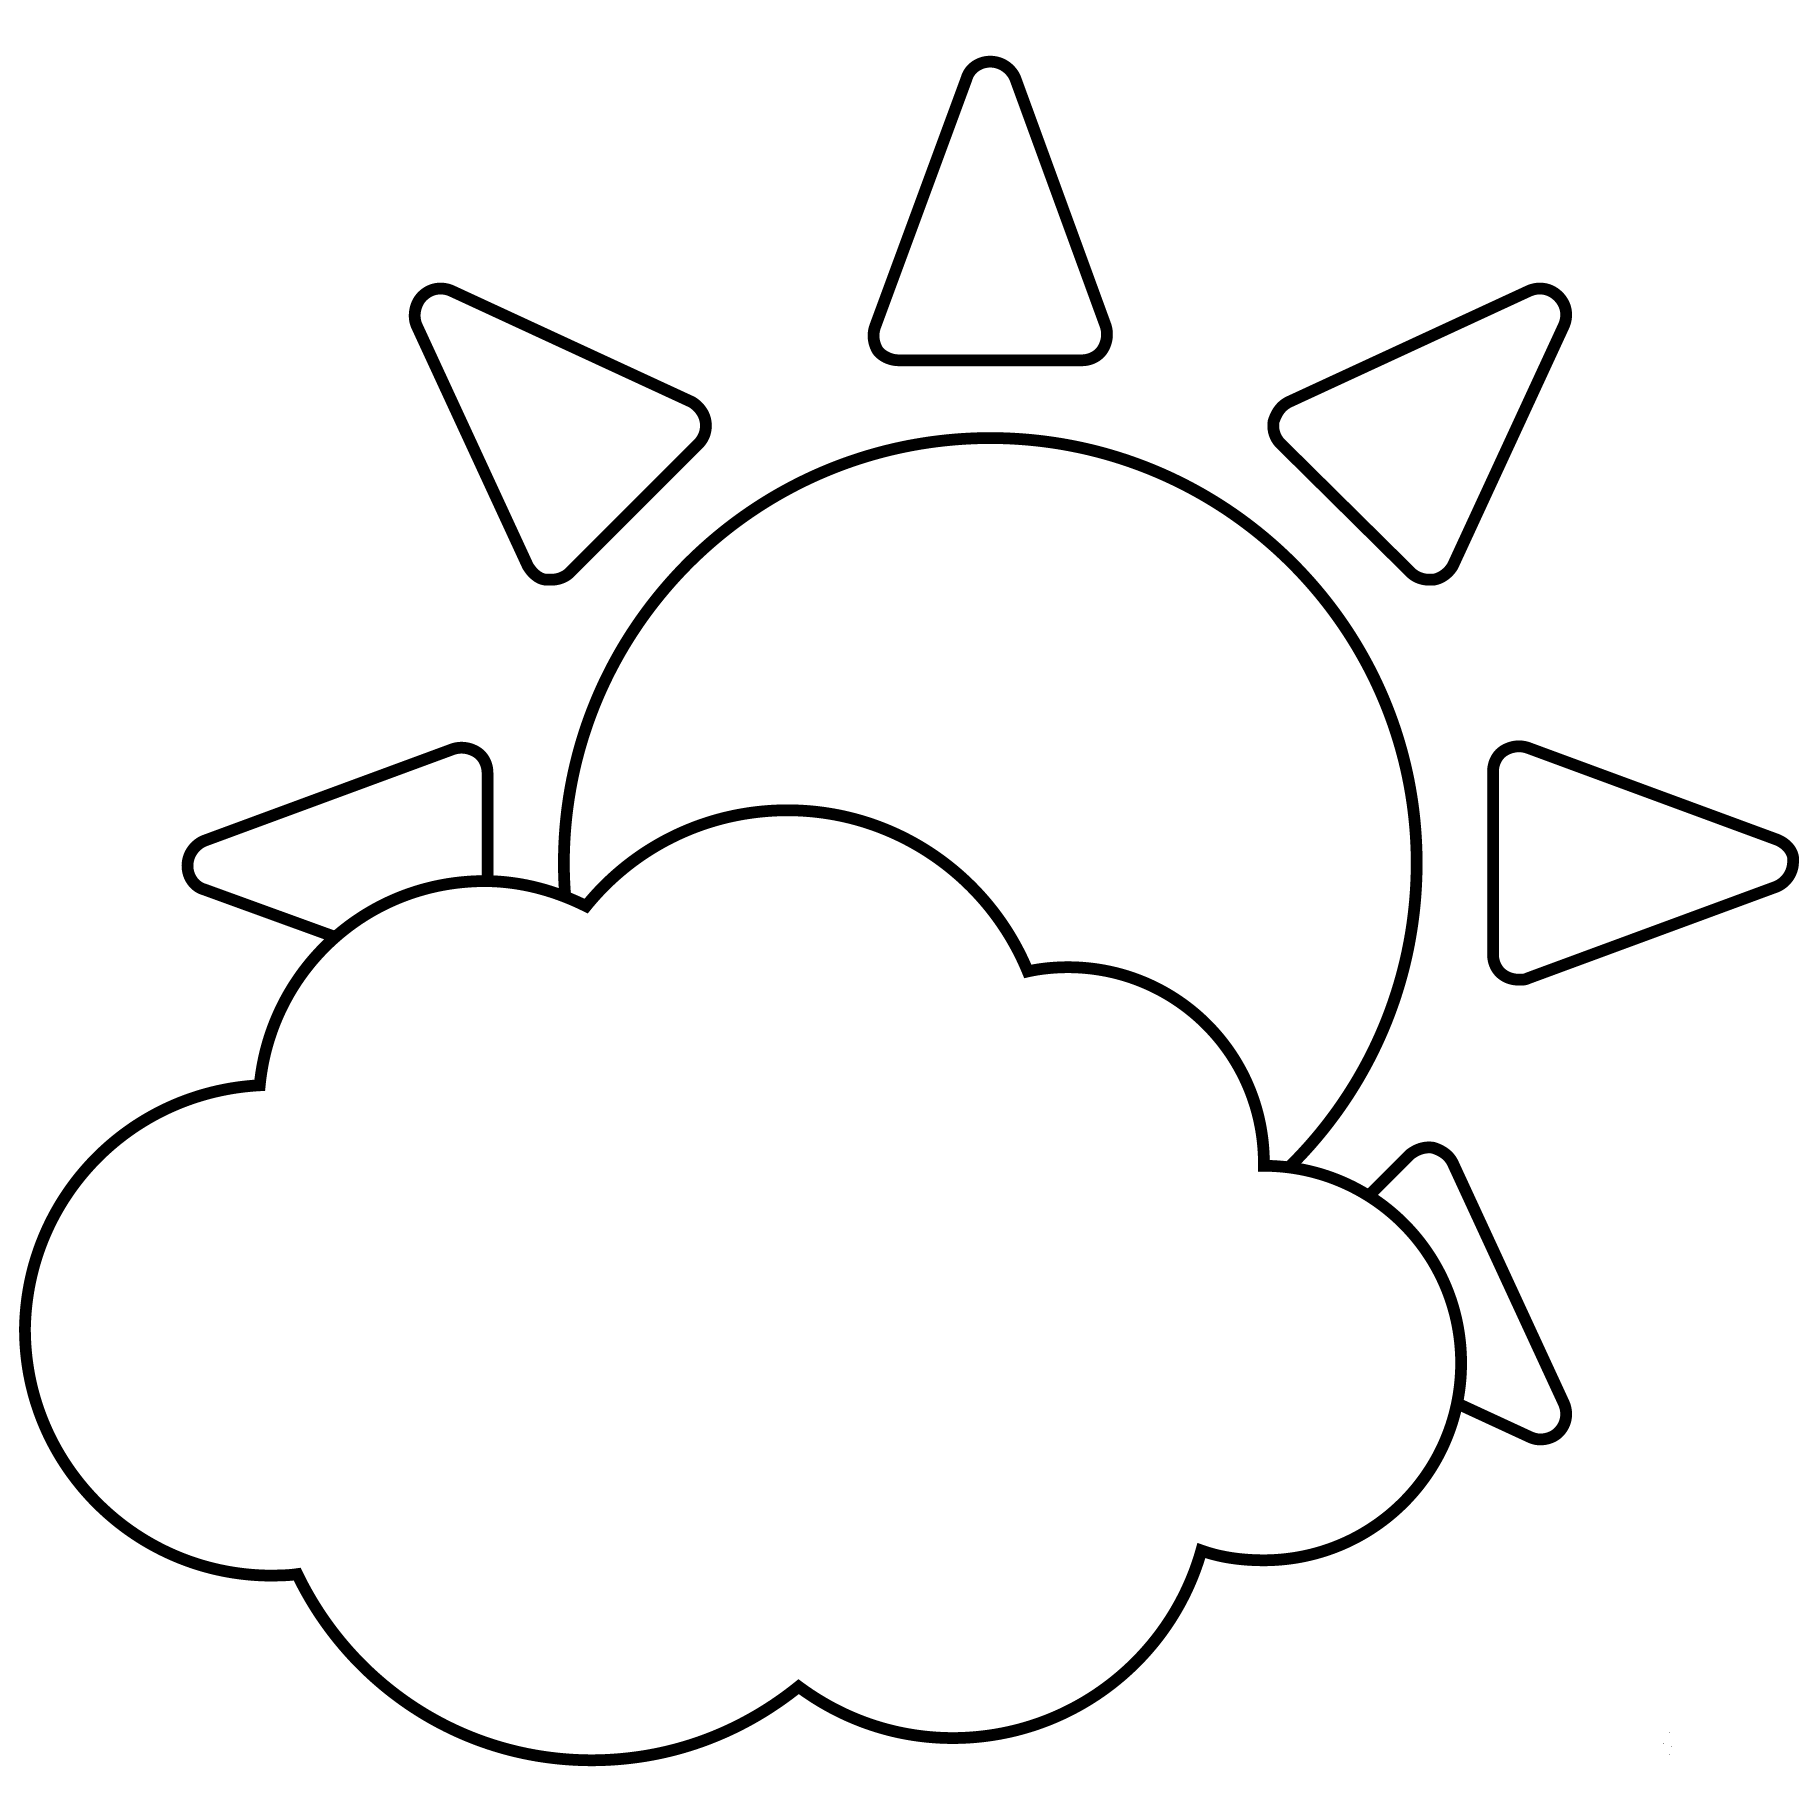 Sun Behind Small Cloud Emoji coloring page - ColouringPages